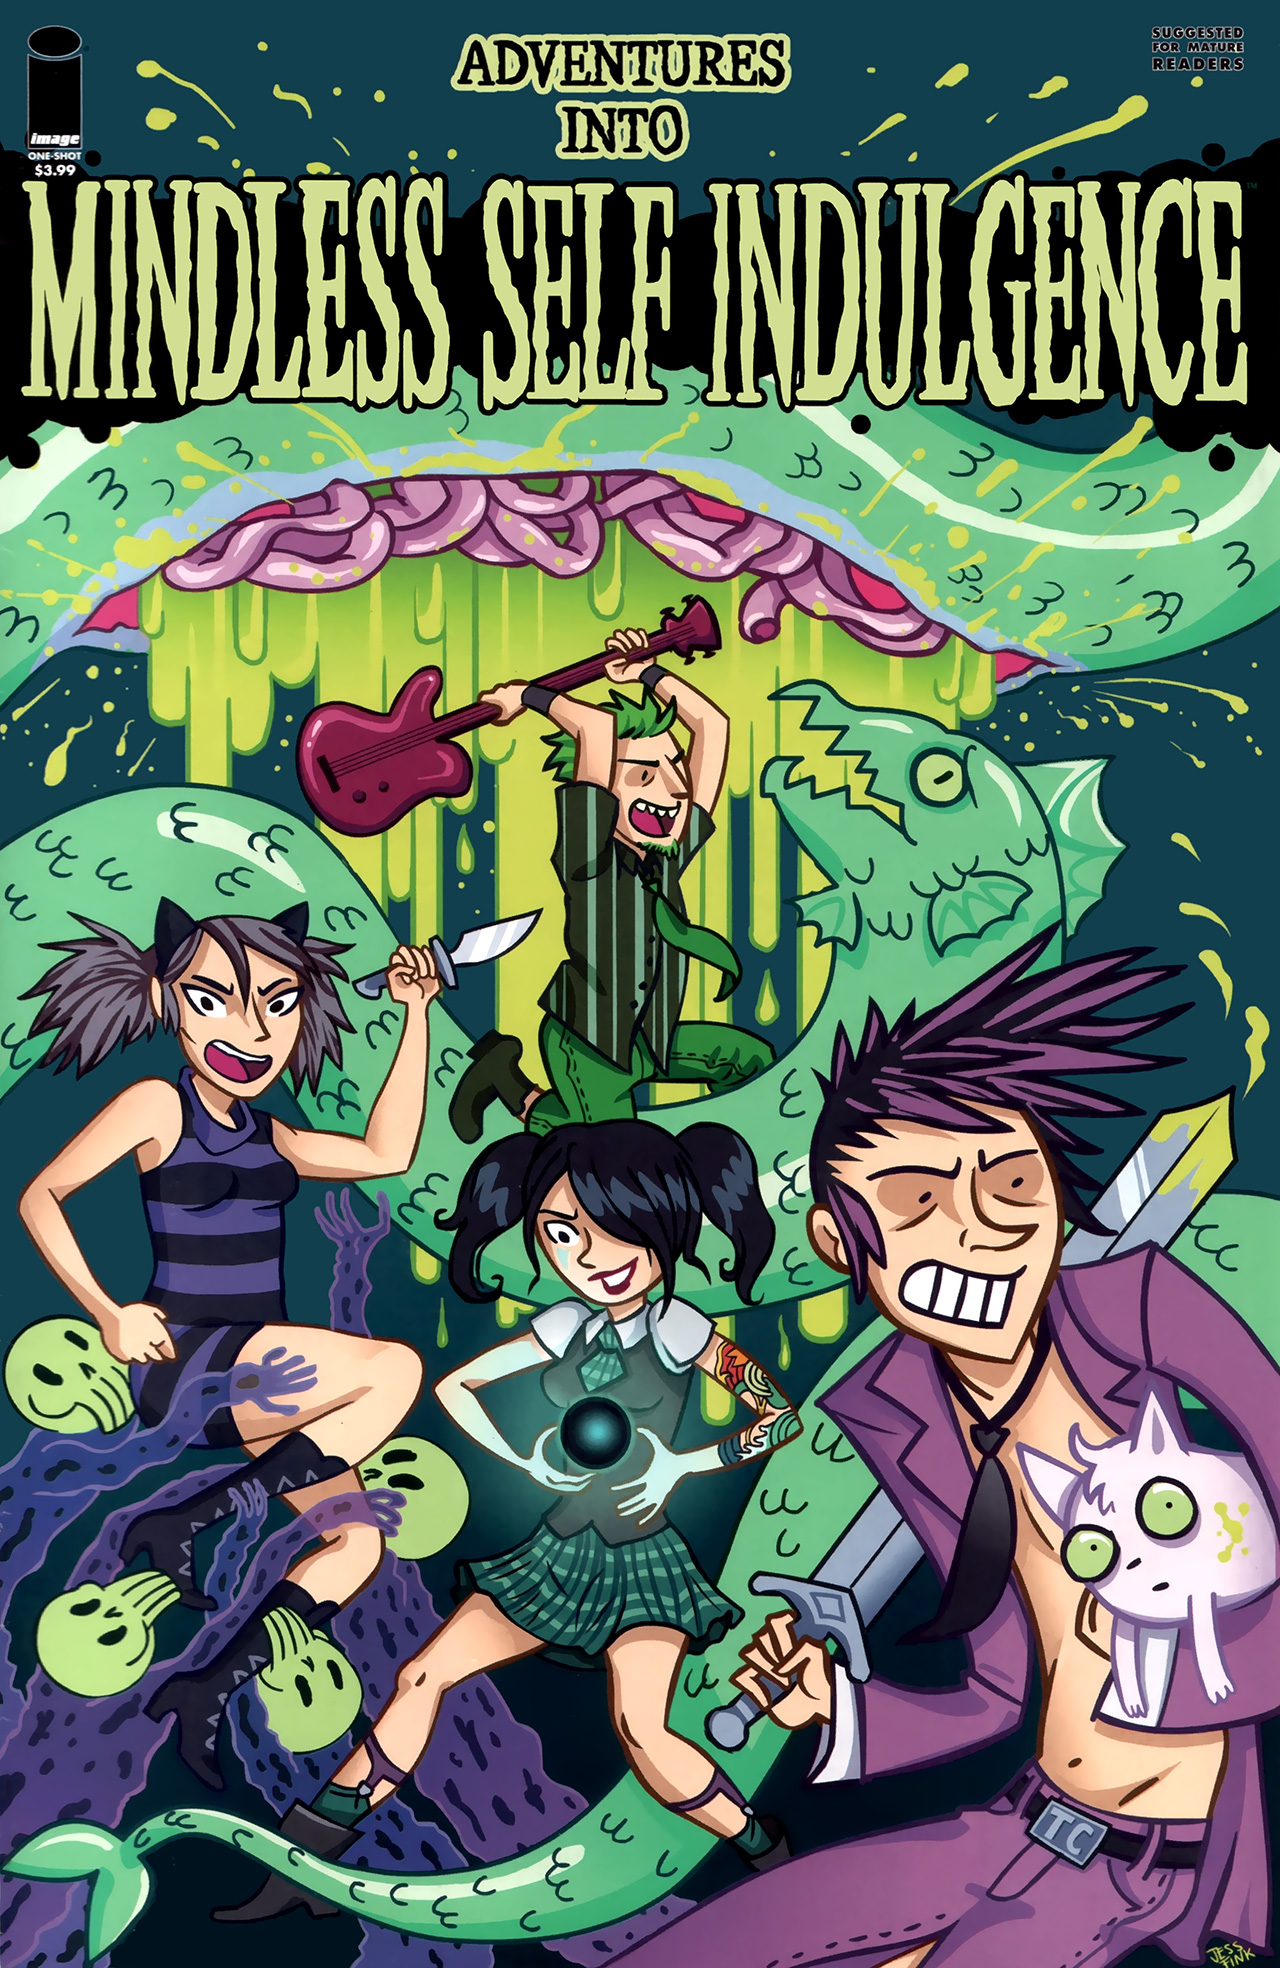 Read online Adventures into Mindless Self Indulgence comic -  Issue # Full - 1